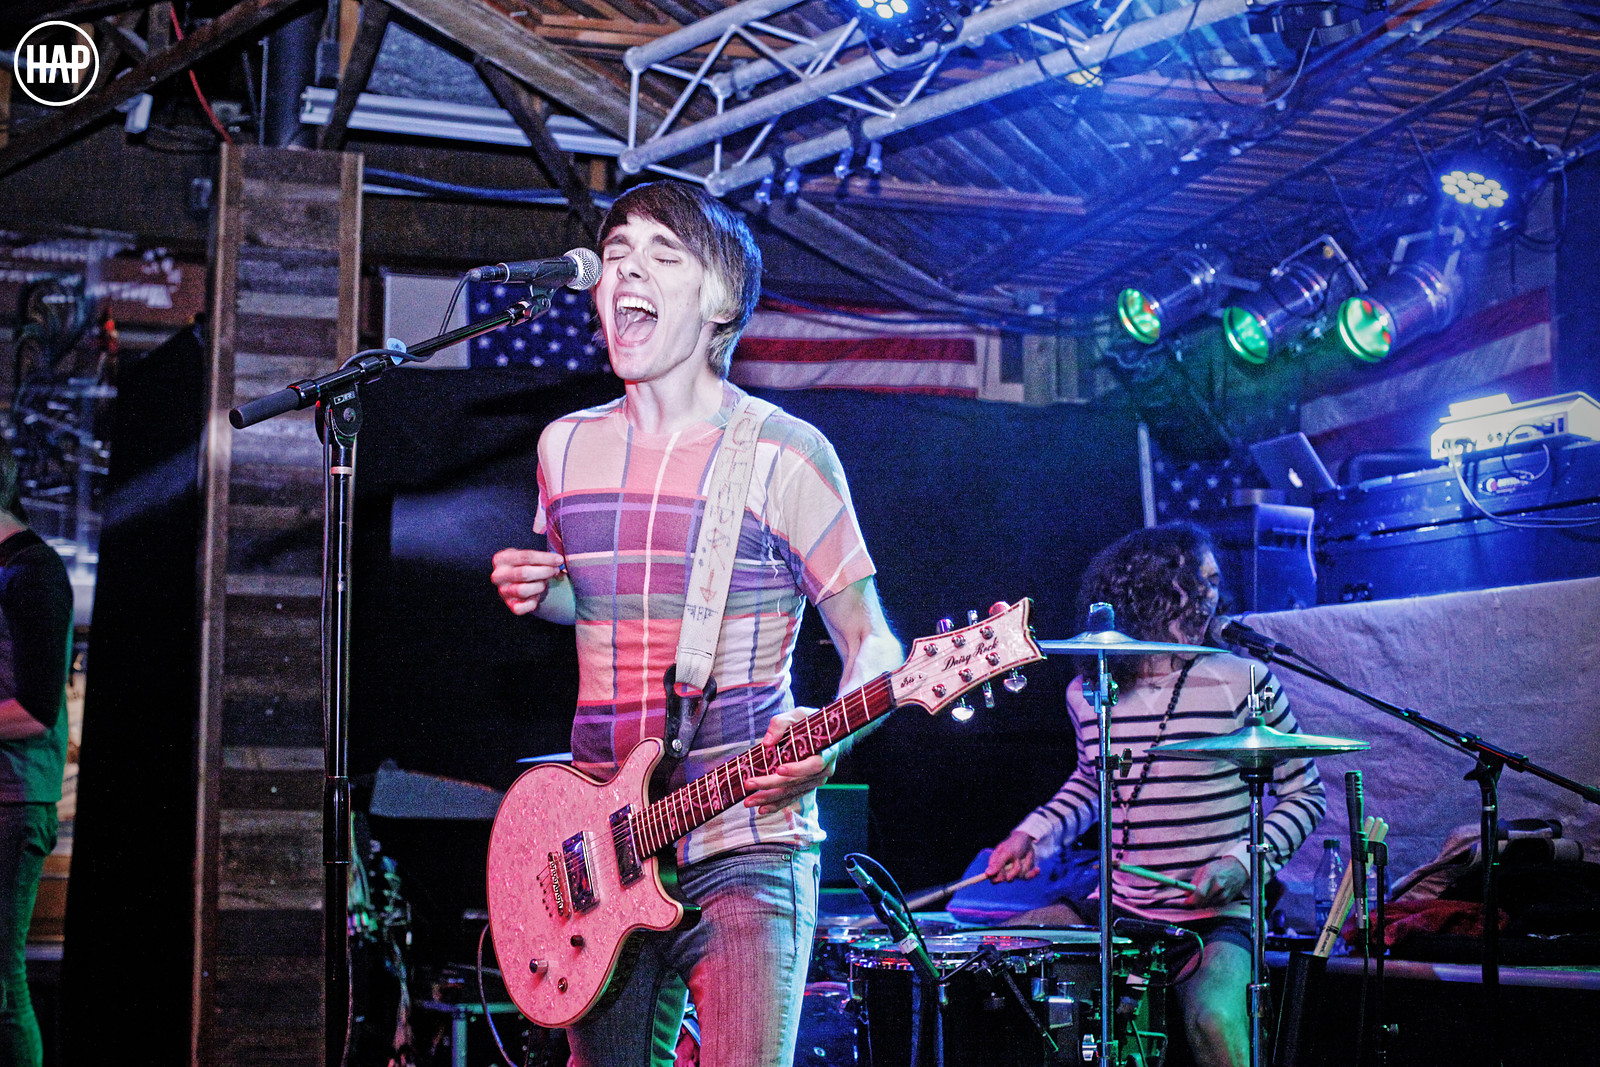 5-11-13 Awsten and Otto at The Concert Pub North in Houston, Texas by Heather Ann Phillips on Flickr